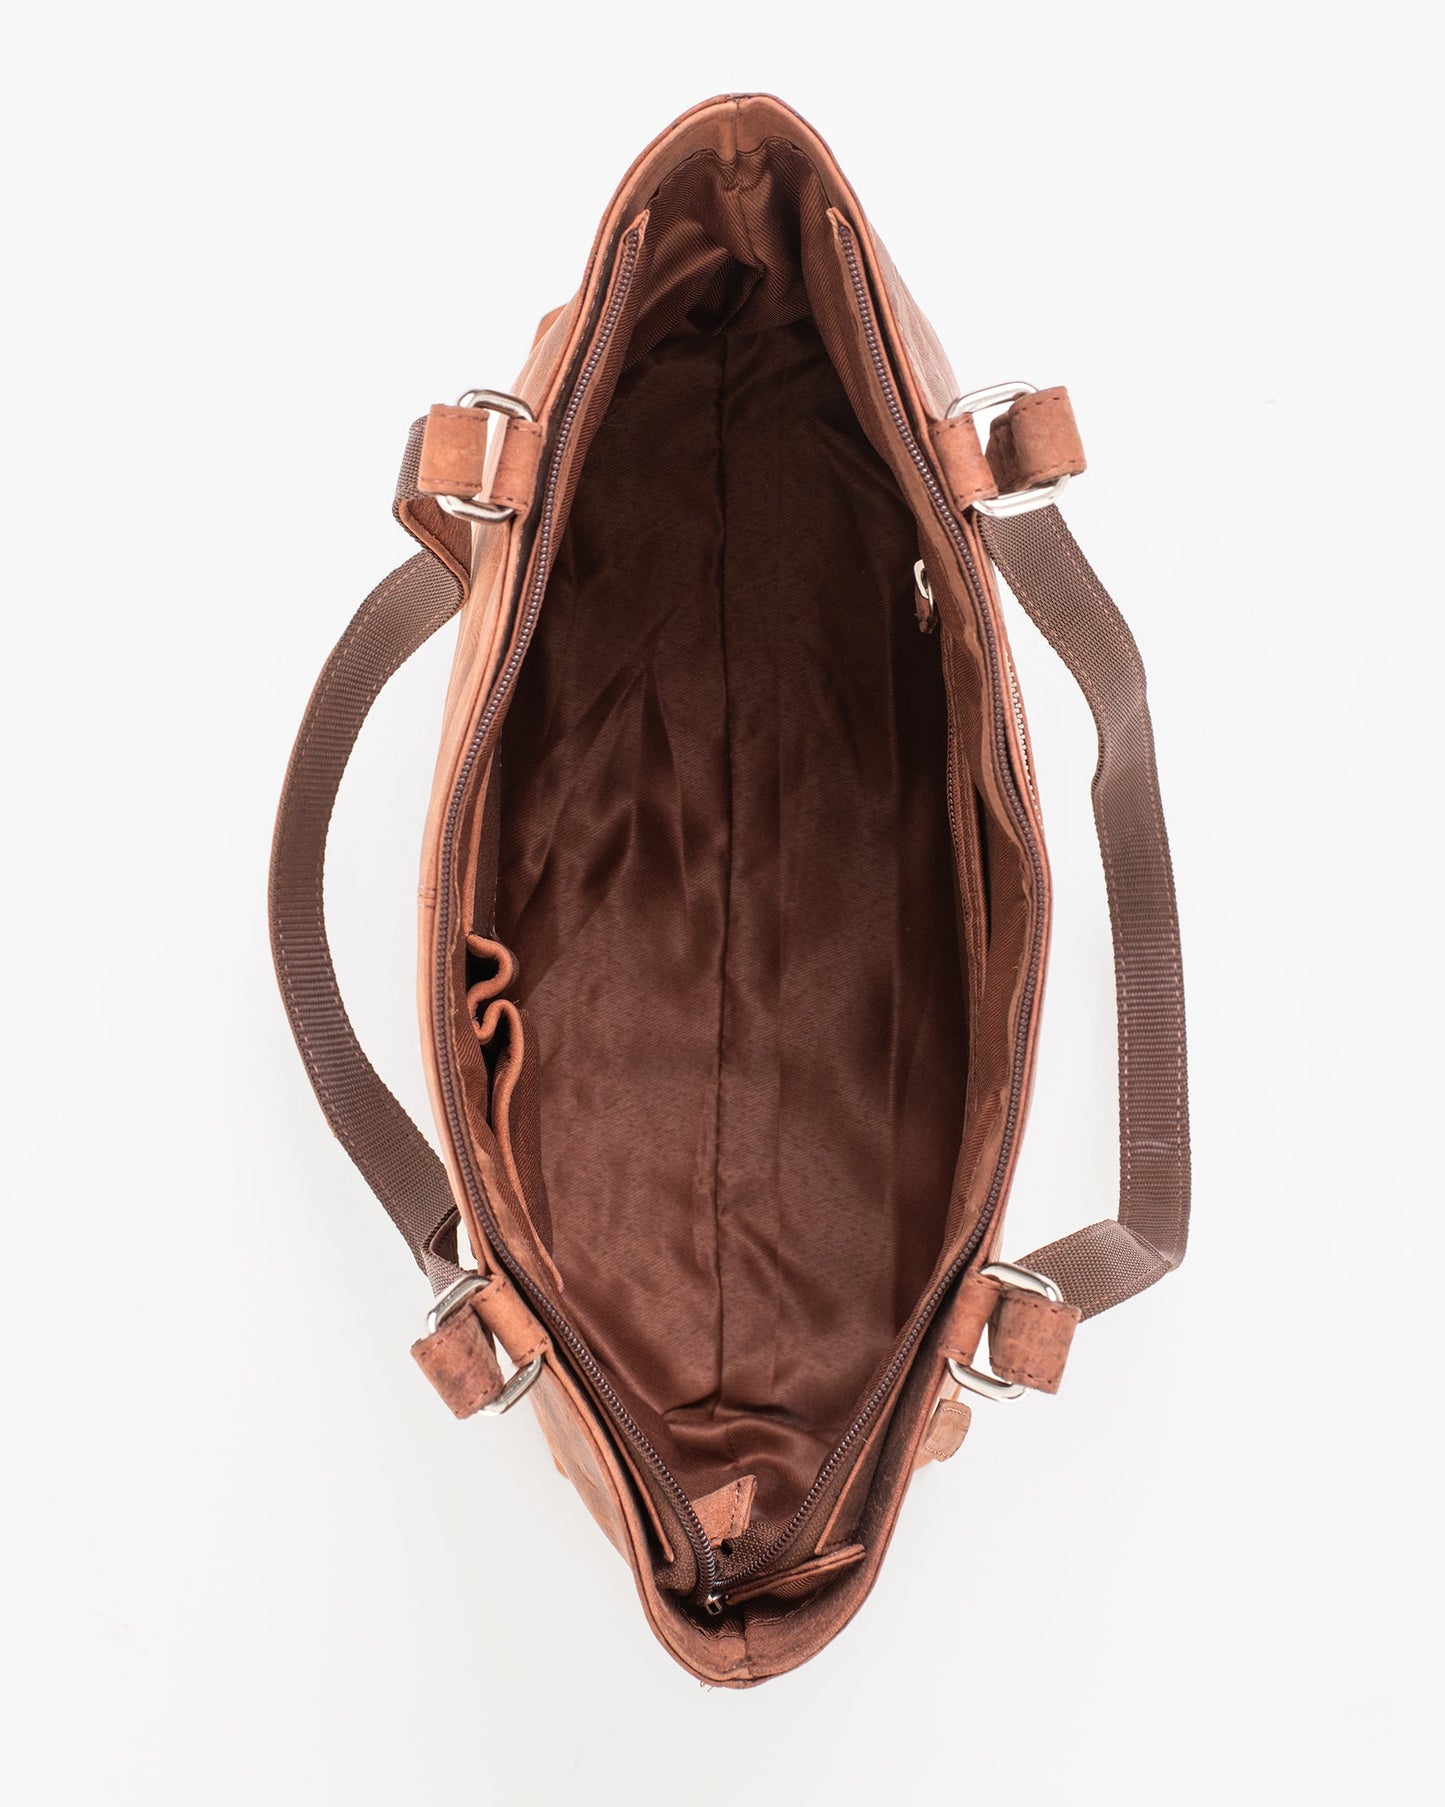 A brown leather shoulder bag with multiple zippered compartments, featuring a close-up of a buckle and detailed stitching. Dimensions: 40 x 26 x 11 cm. Made by Finnish brand Nabo.